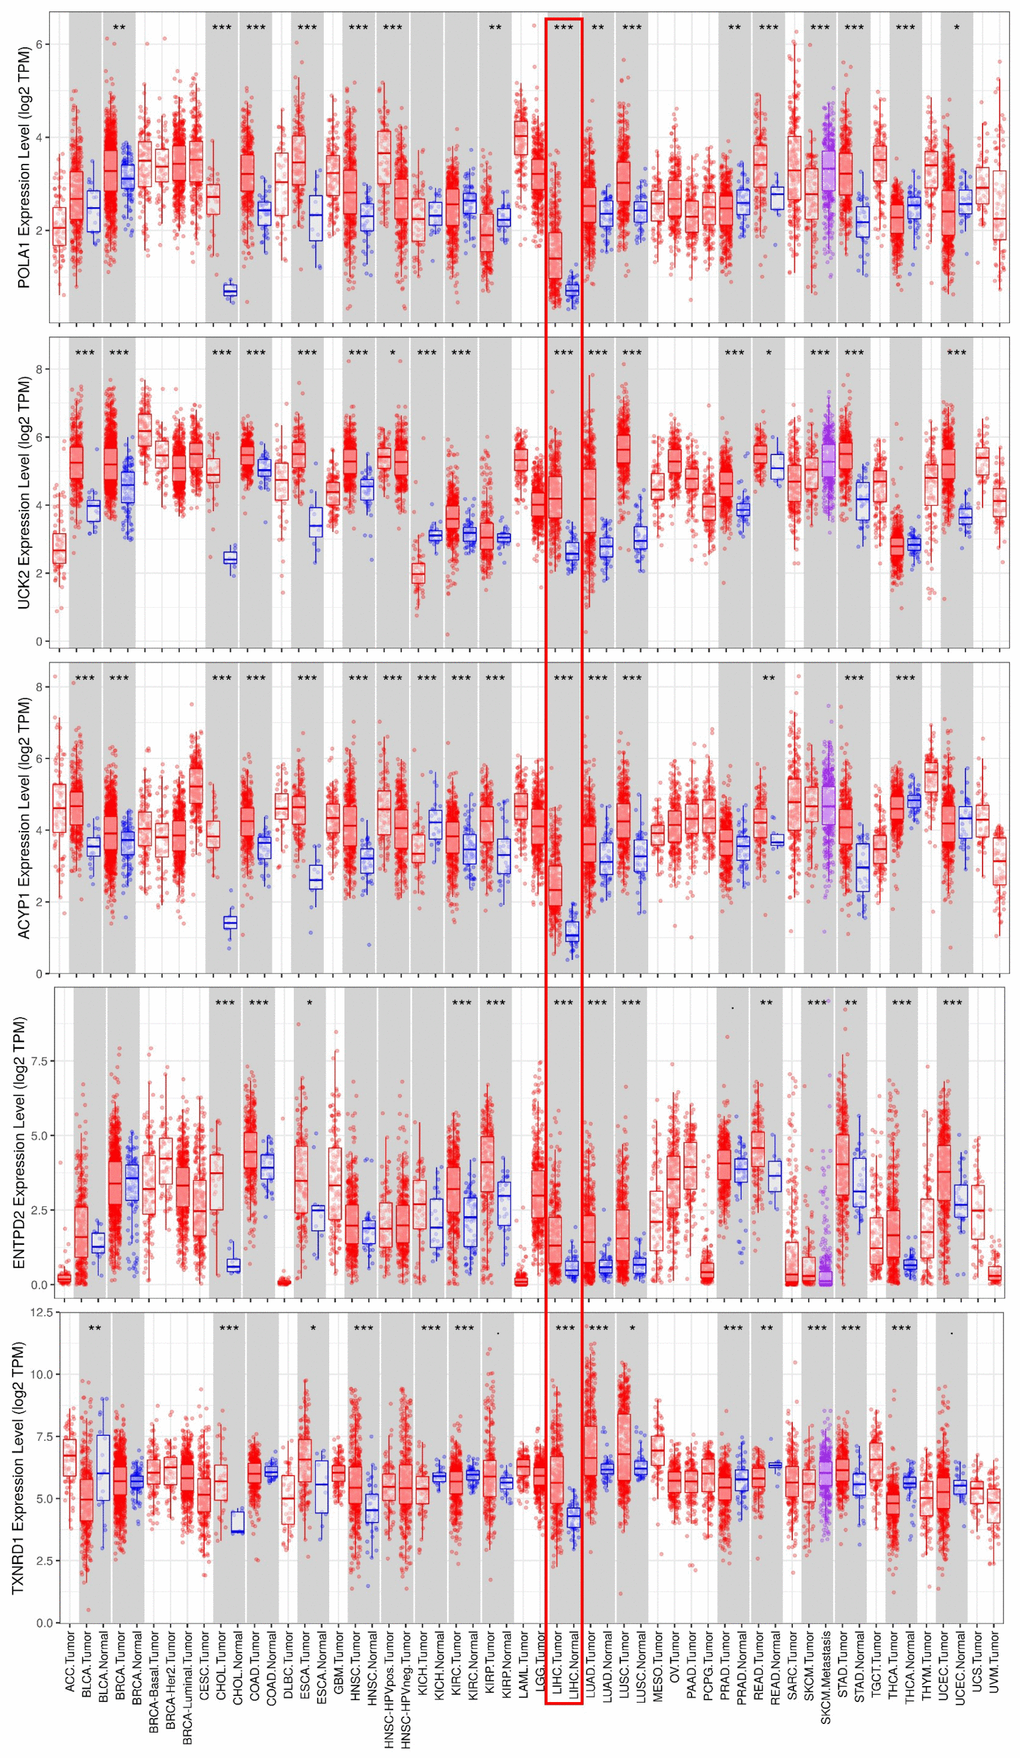 mRNA expression of the five prognosis-related metabolic genes in cancers. Data are from the TIMER database (https://cistrome.shinyapps.io/timer/) [50]. The expression of POLA1, UCK2, ACYP1, ENTPD2 and TXNRD1 was significantly upregulated at the mRNA level in HCC.